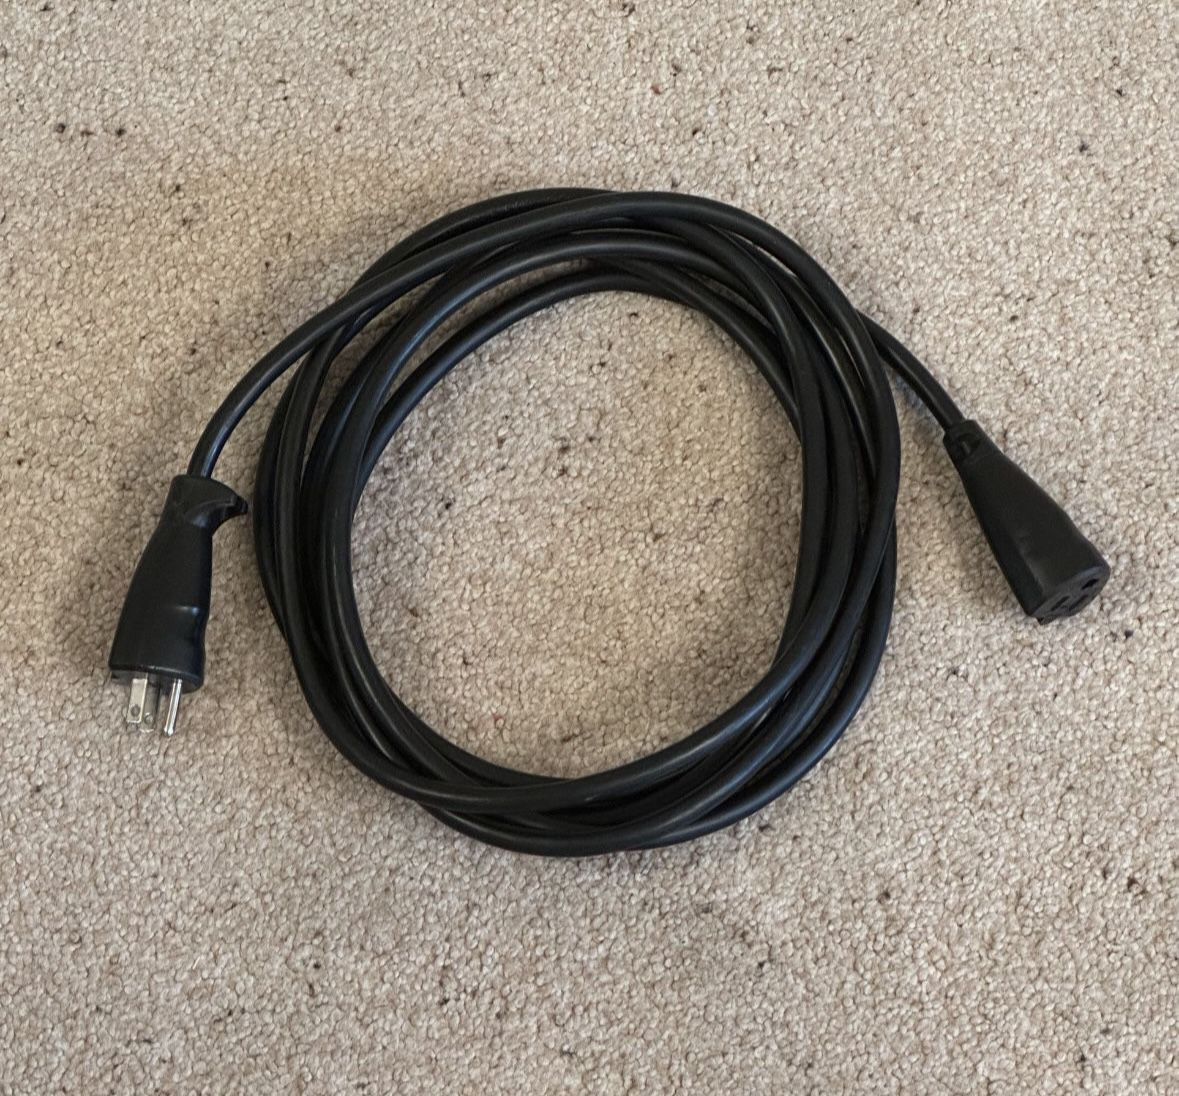 15 Ft Stanley Heavy Duty Black Extension Cord 